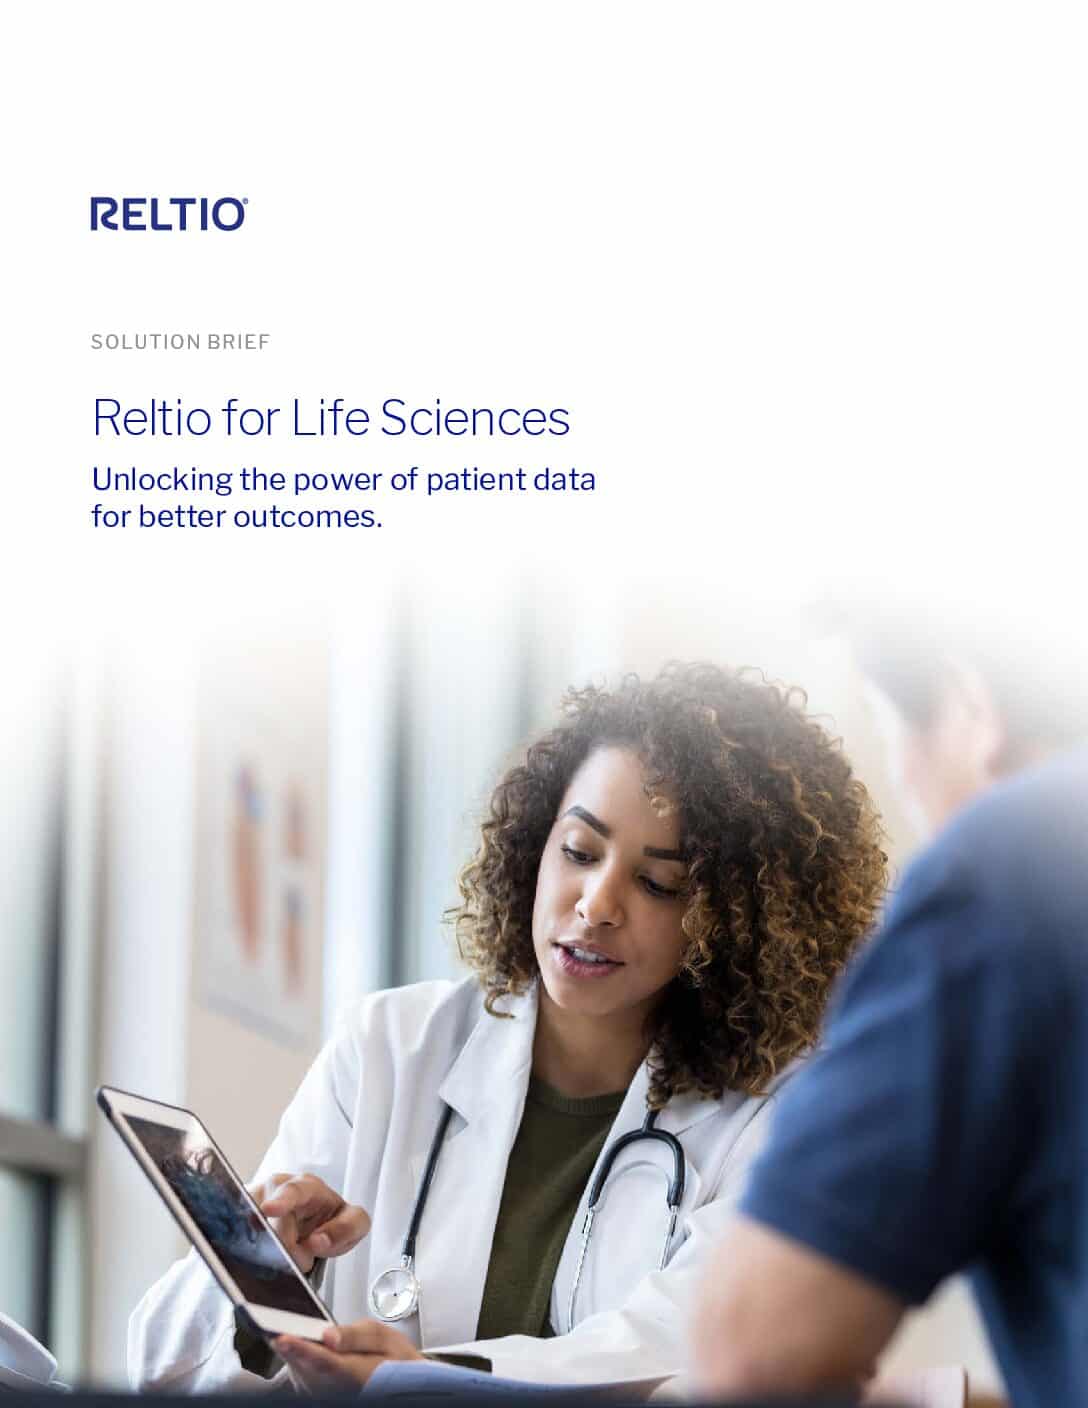 Featured image for Reltio for Life Sciences: <br>Unlocking the power of patient data for better outcomes.